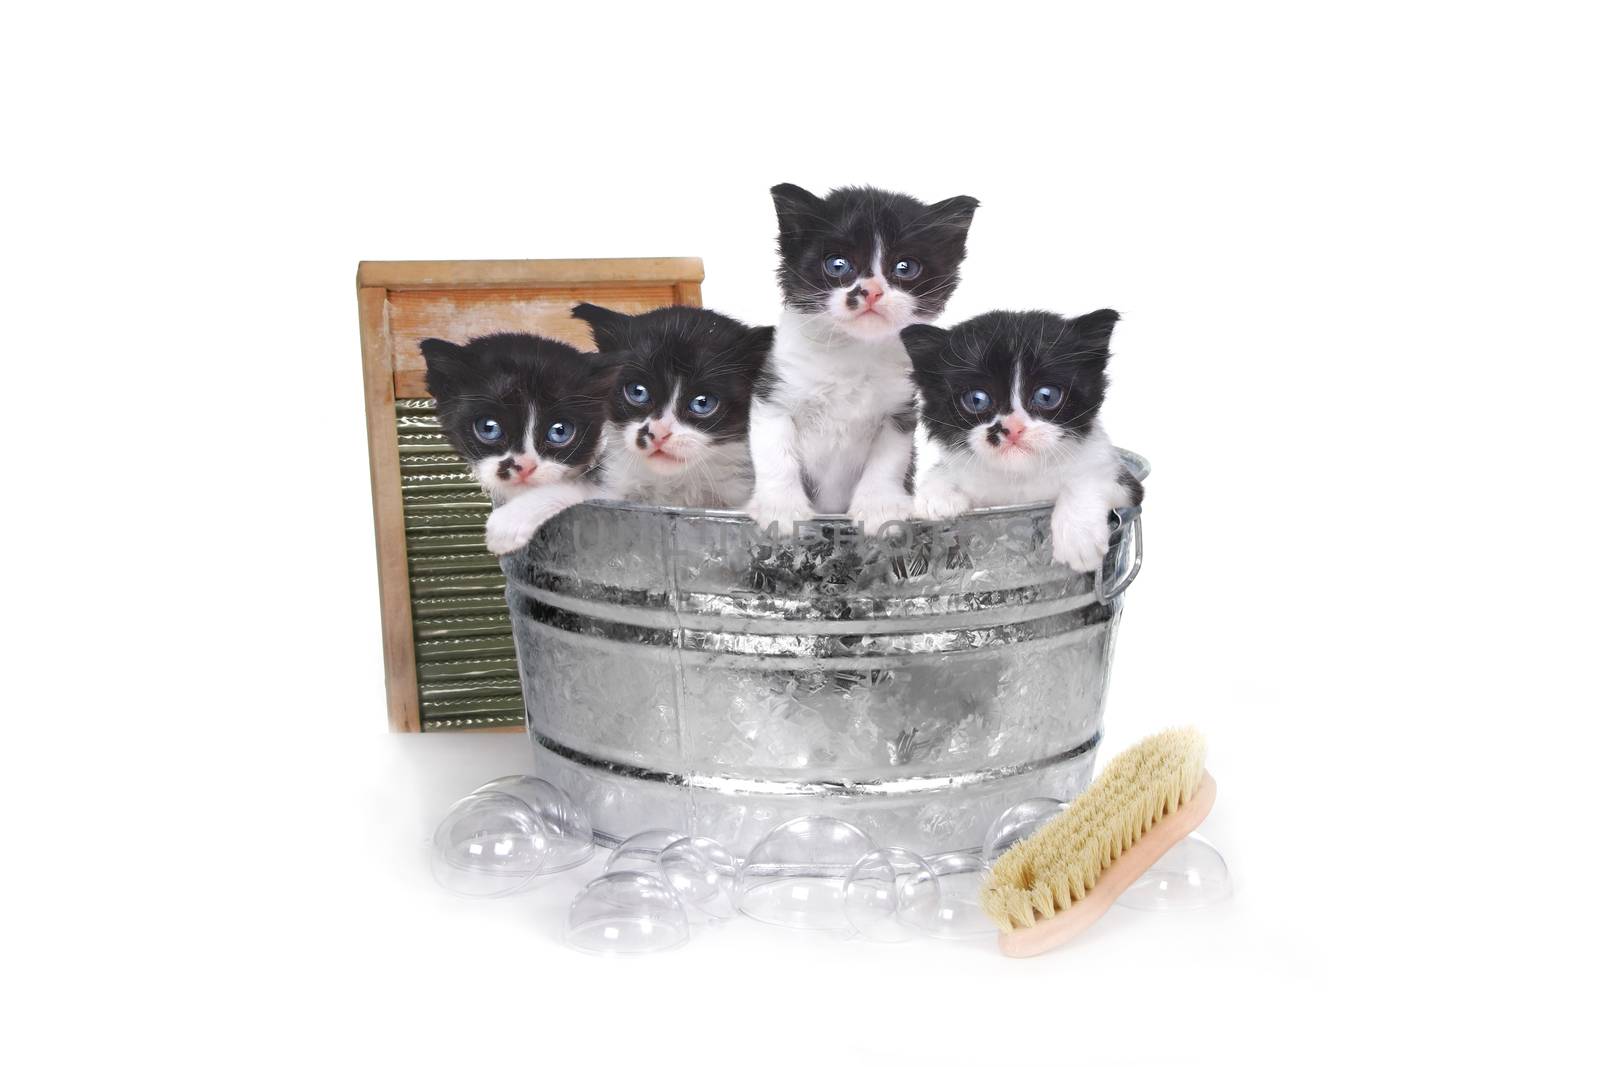 Kittens Taking a Bath in a Washtub With Brush and Bubbles by tobkatrina